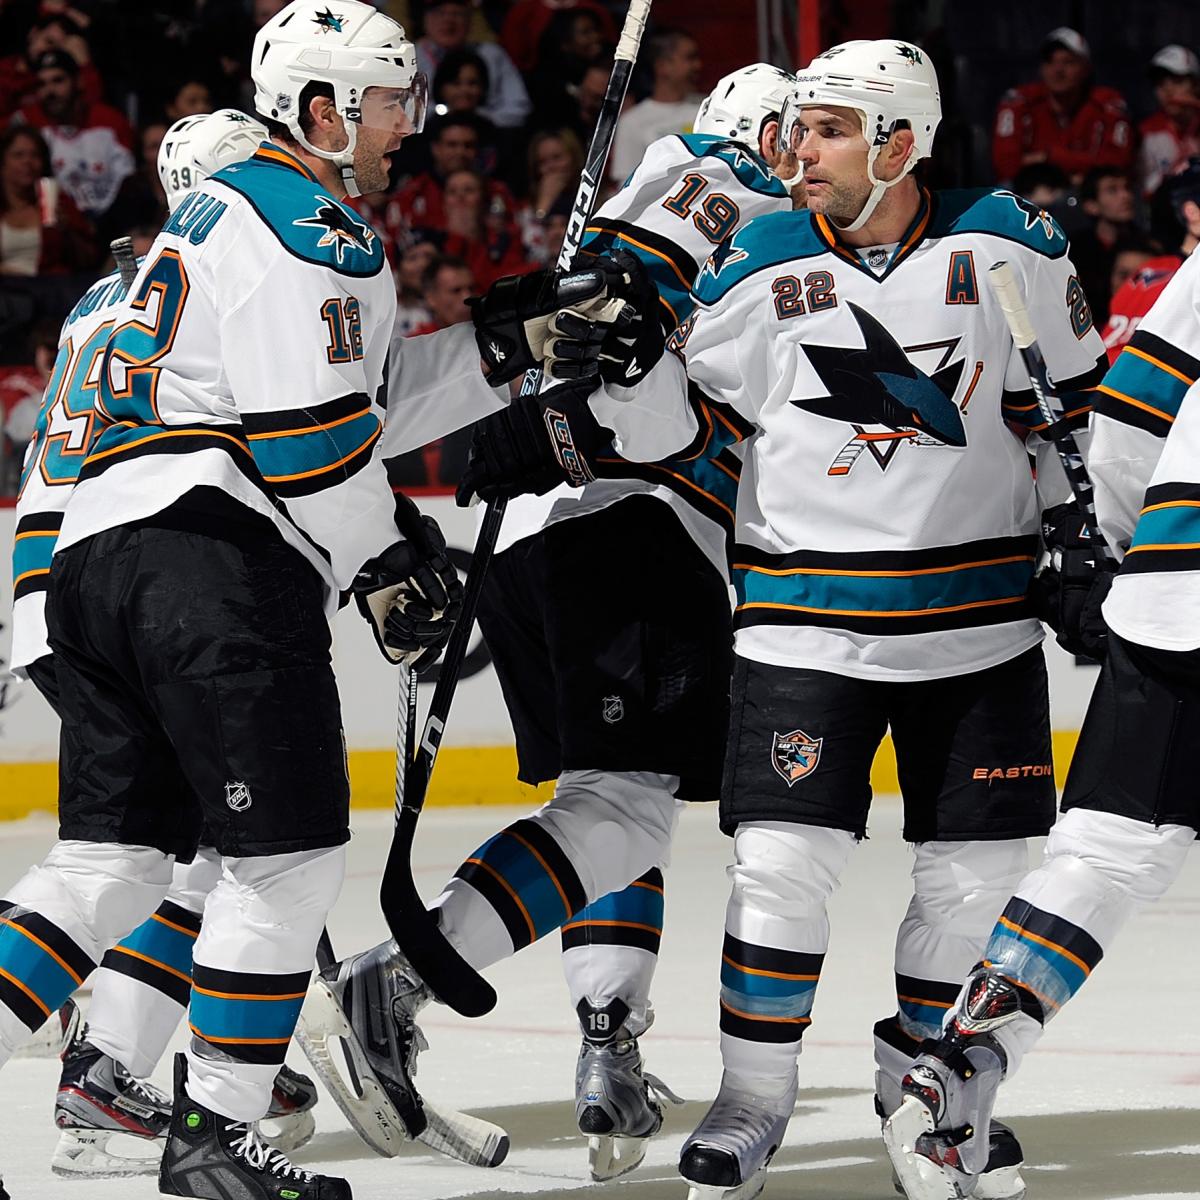 San Jose Sharks Will This Be Their Breakthrough Year? News, Scores